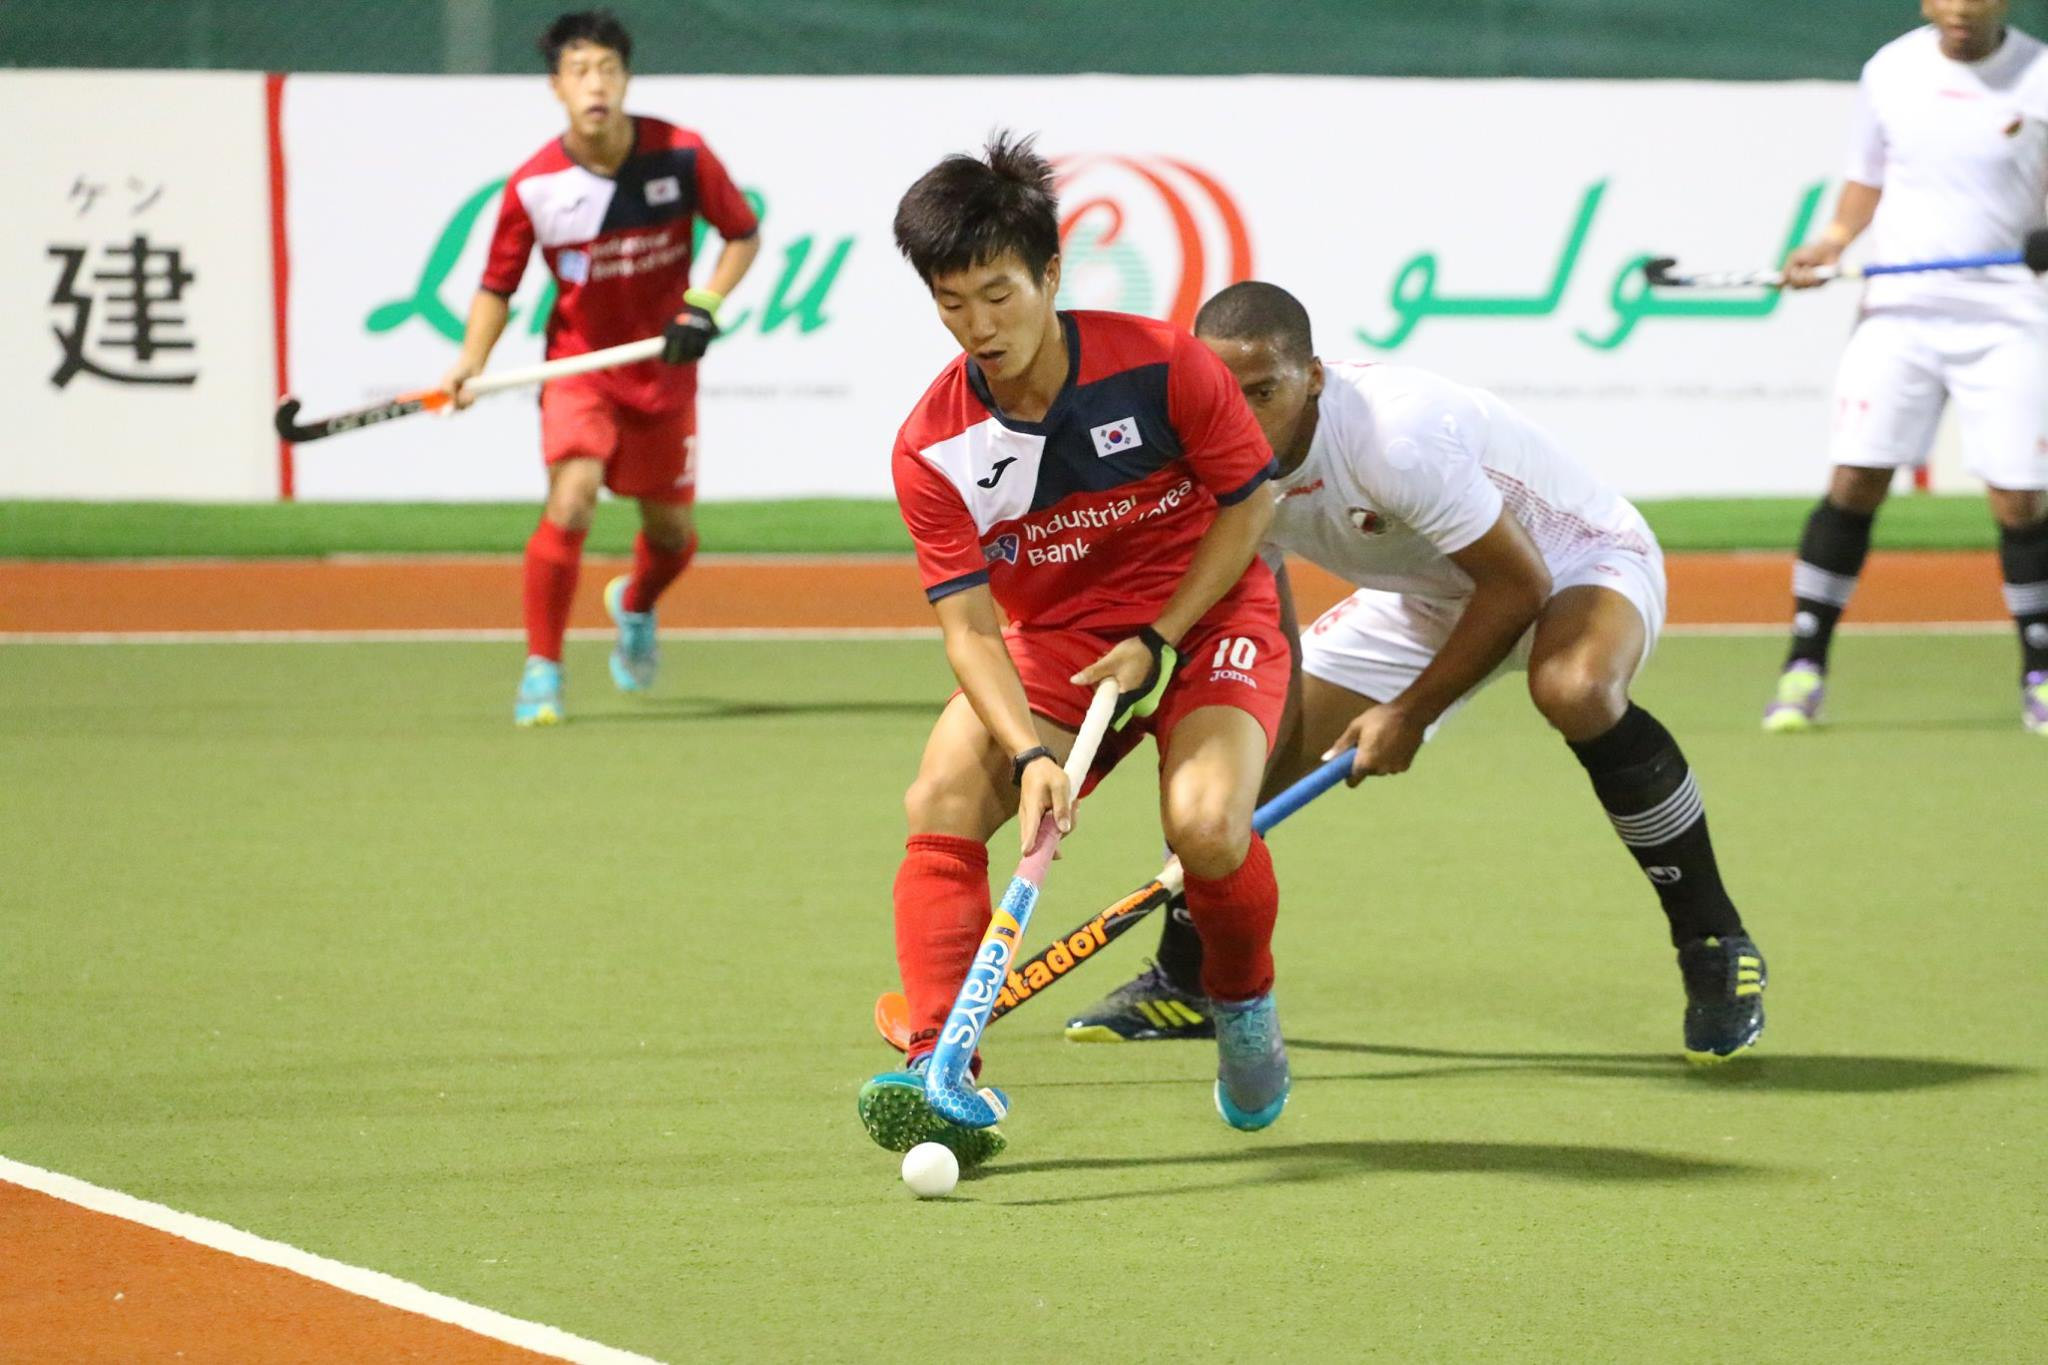 South Korea beat Oman 4-2 to win their first points of the Asian Men's Hockey Champions Trophy ©Asian Hockey Federation